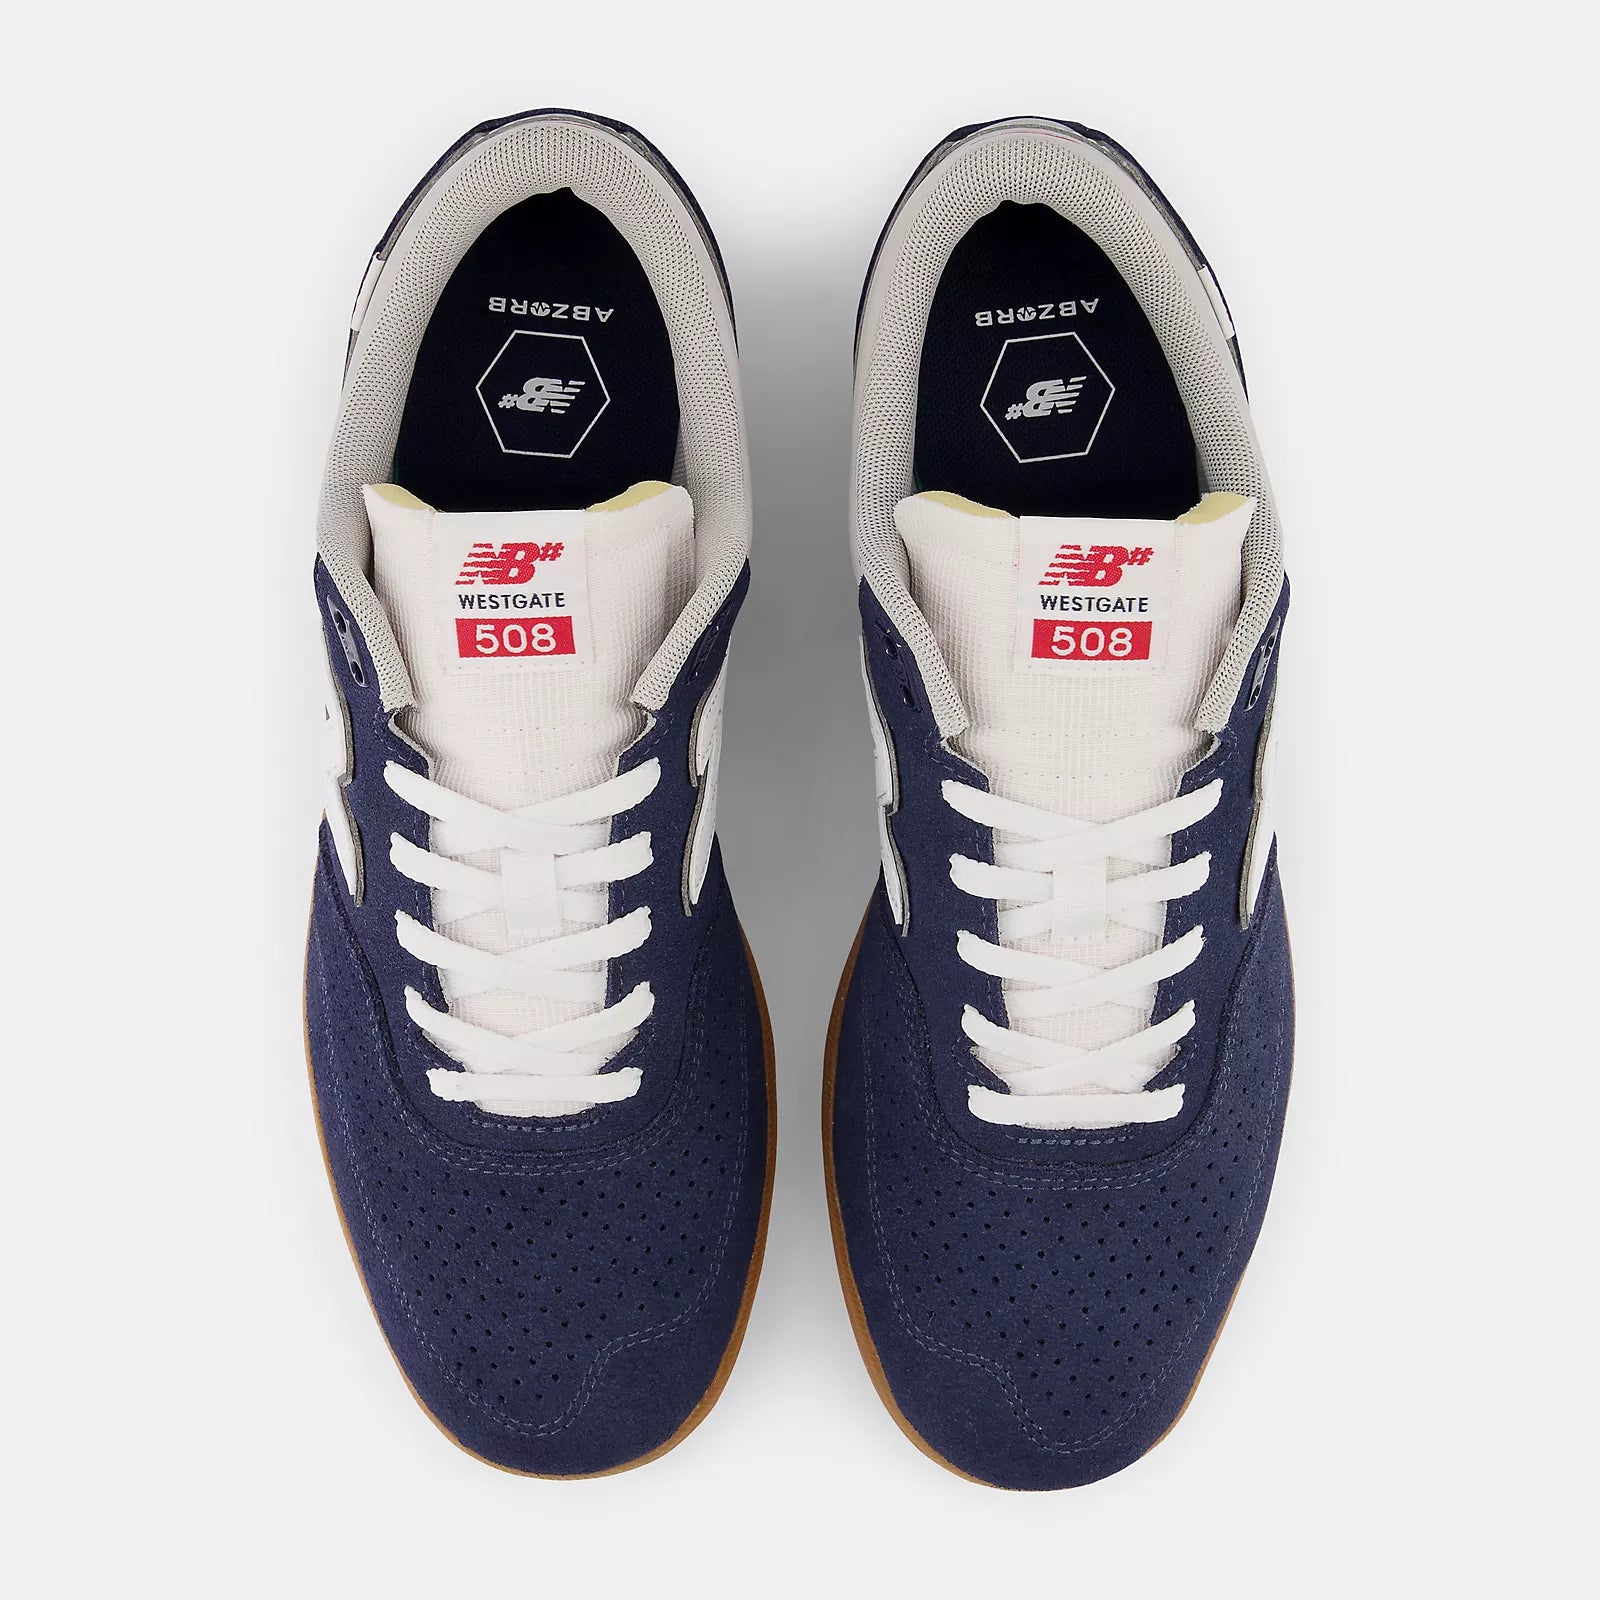 NB NUMERIC 508 BRANDON WESTGATE - NAVY WITH WHITE